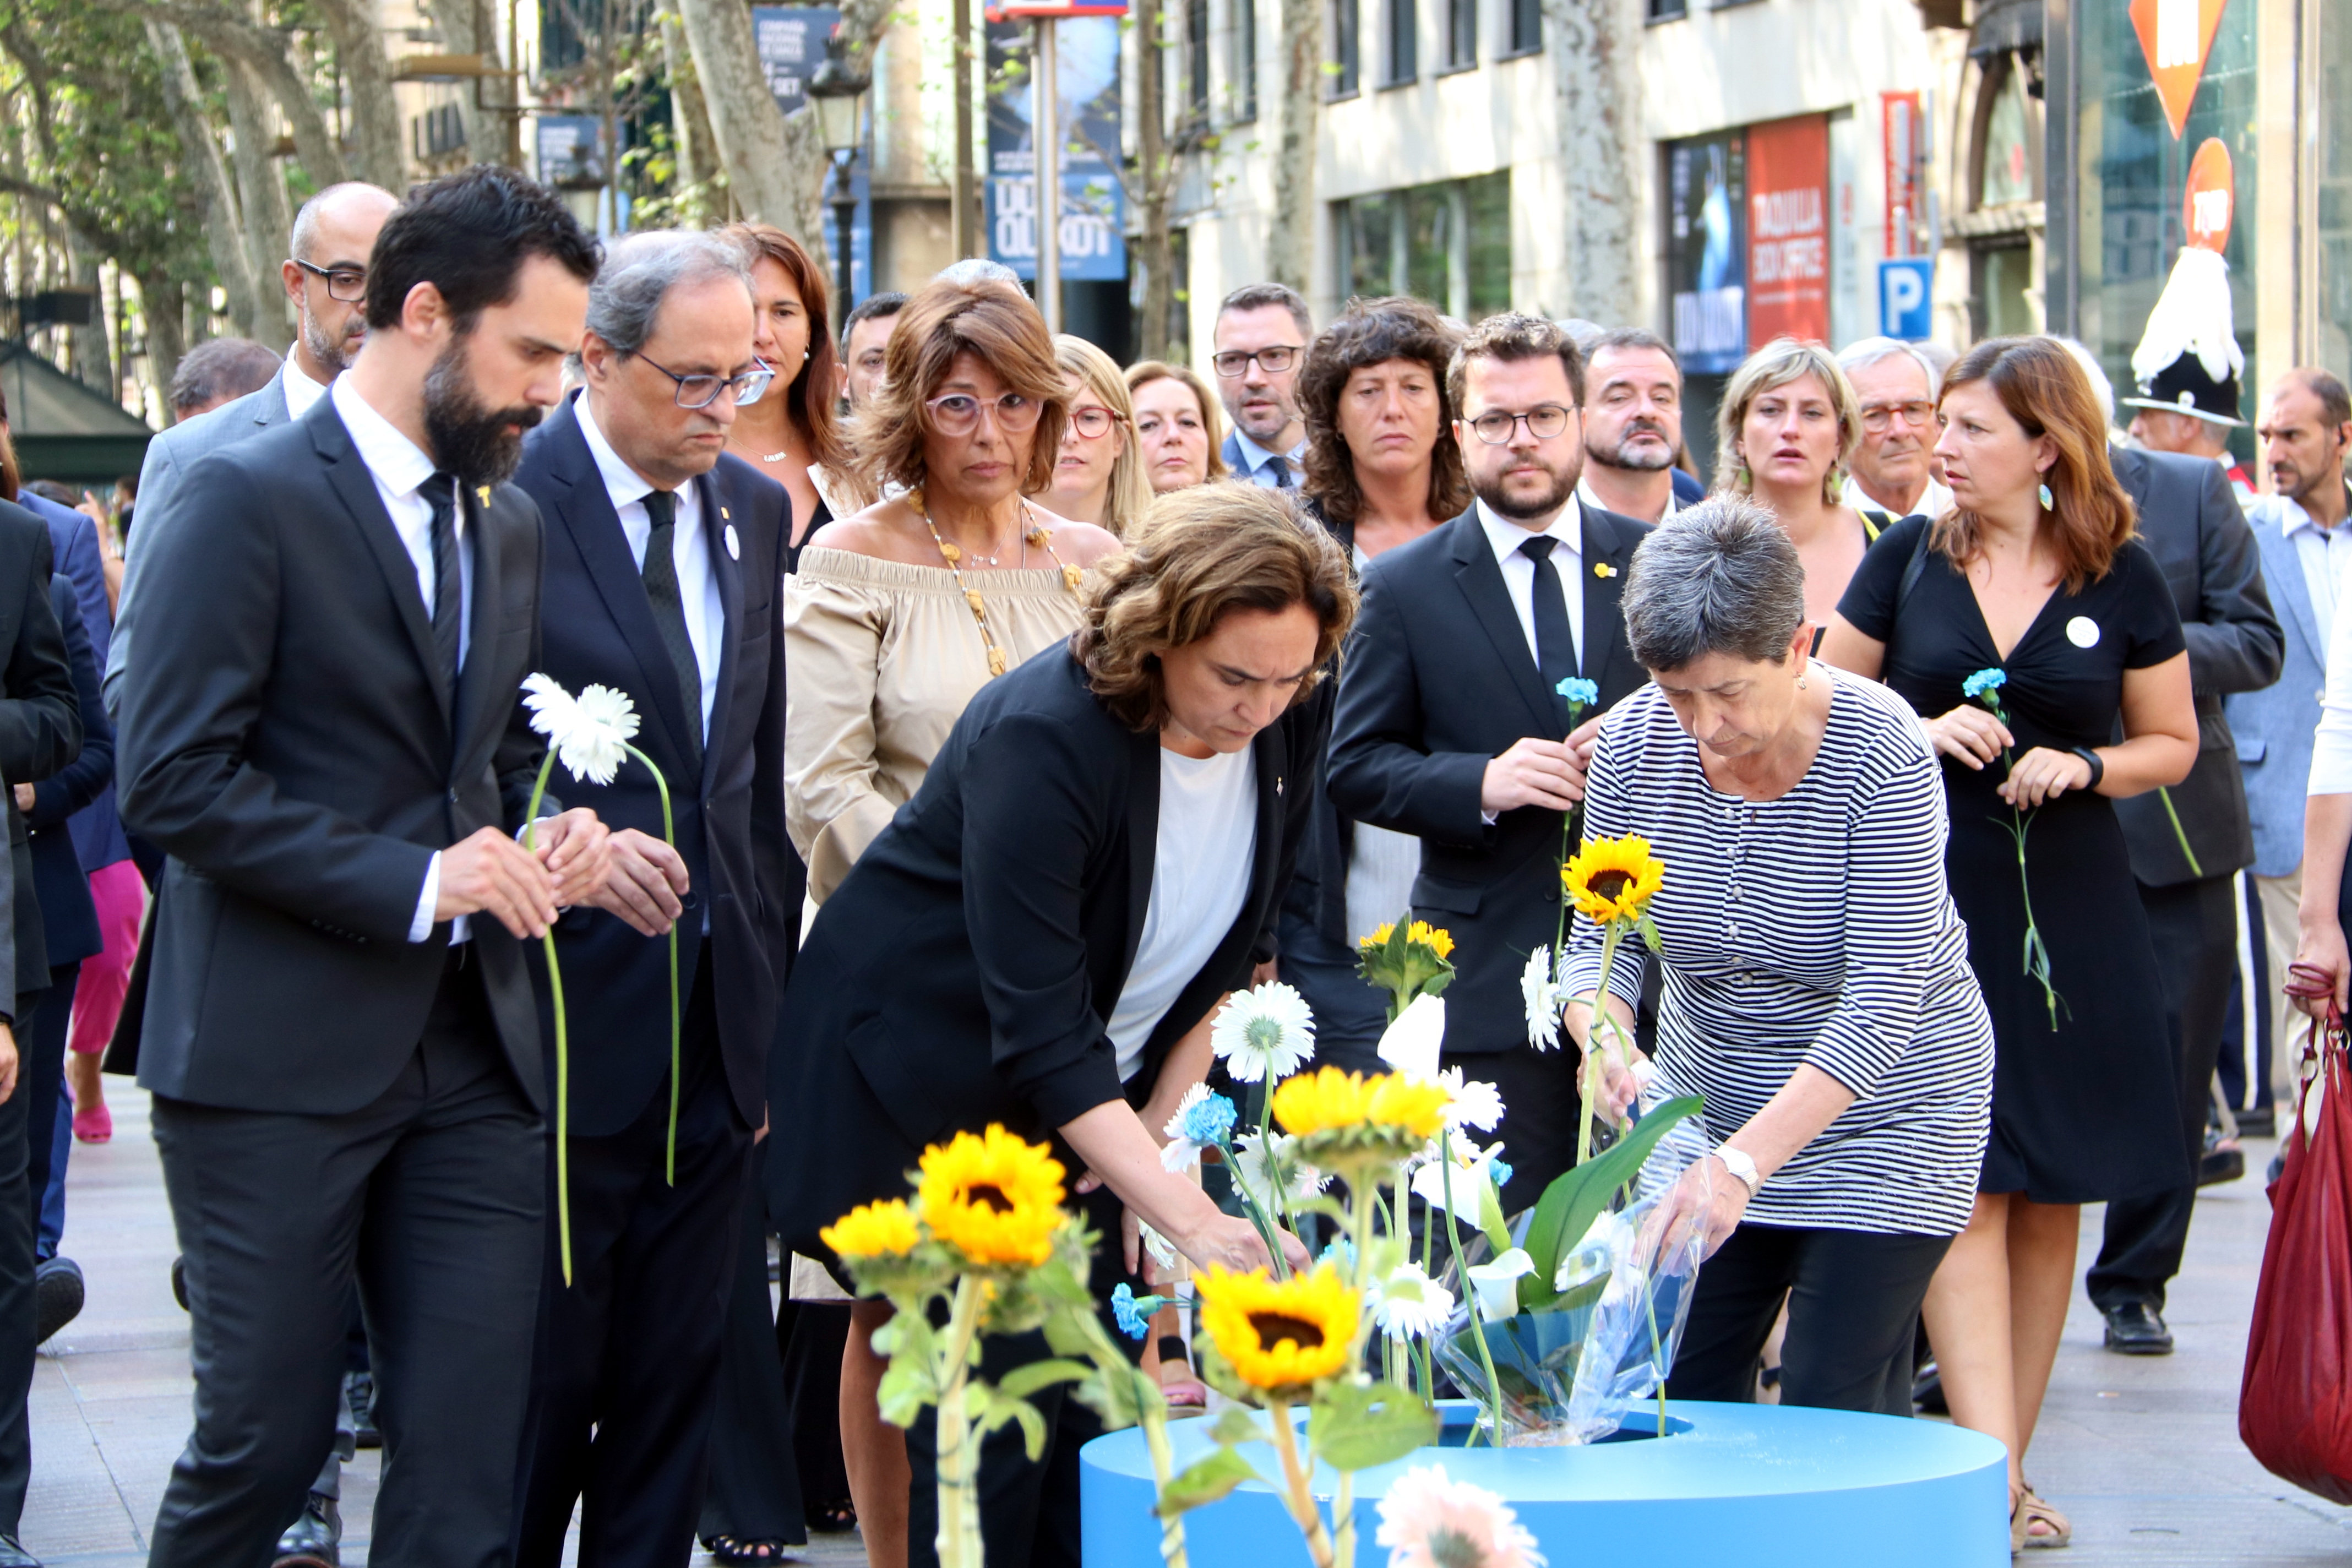 Barcelona mayor Ada Colau and other prominent politicians place flowers in honor of the victims of the 2017 attacks one year on (Pere Francesch/ACN)